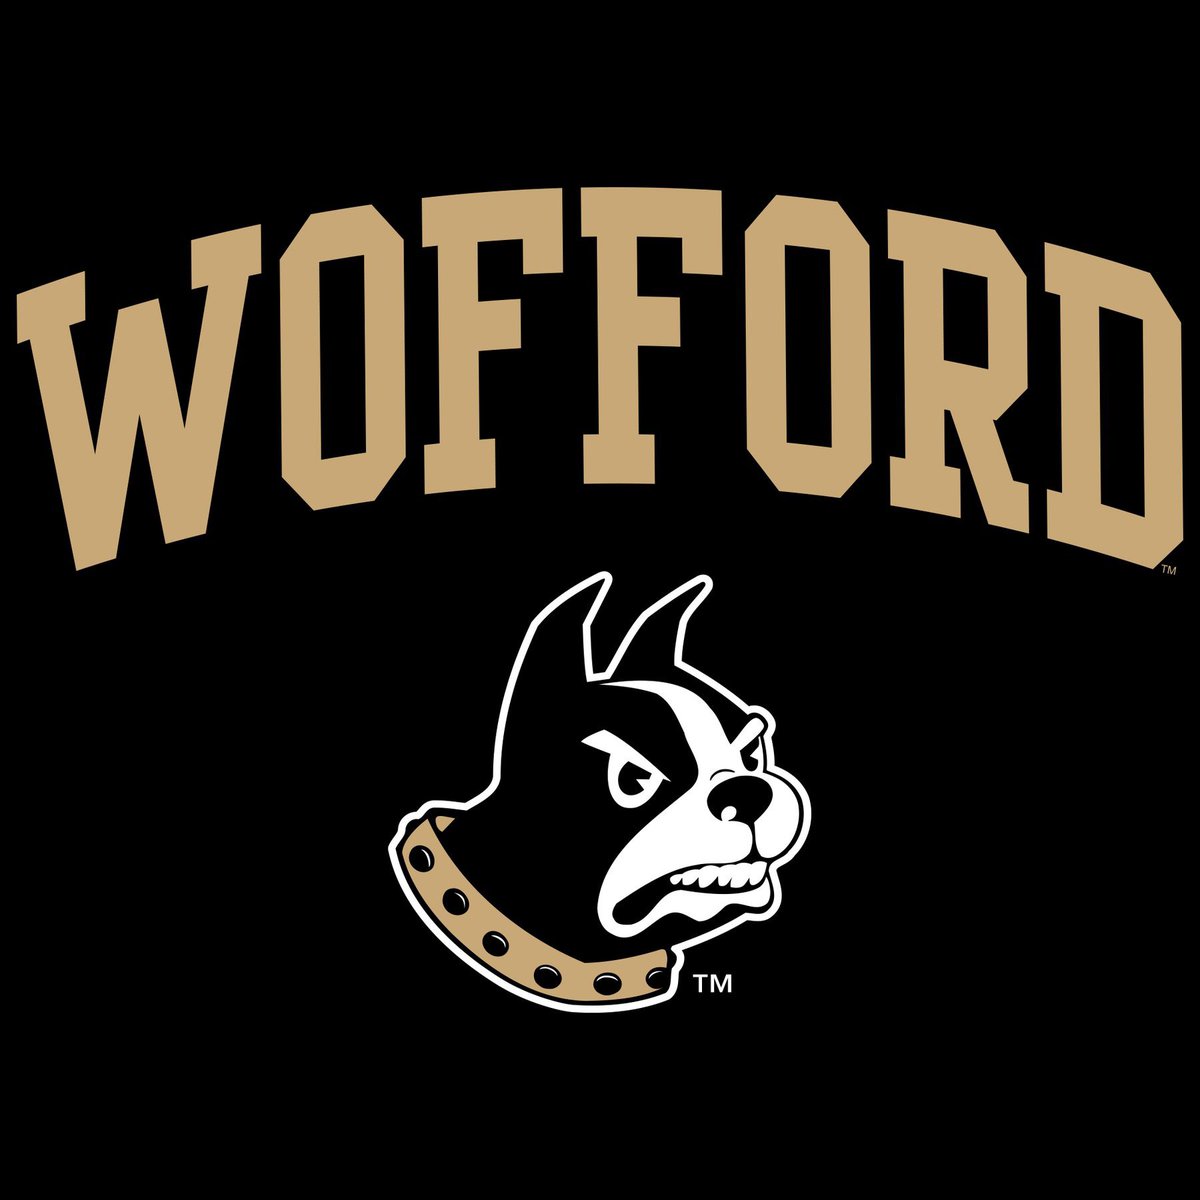 Blessed to receive another D1 scholarship offer to Wofford!! @CoachEmini @CoachWatson_24